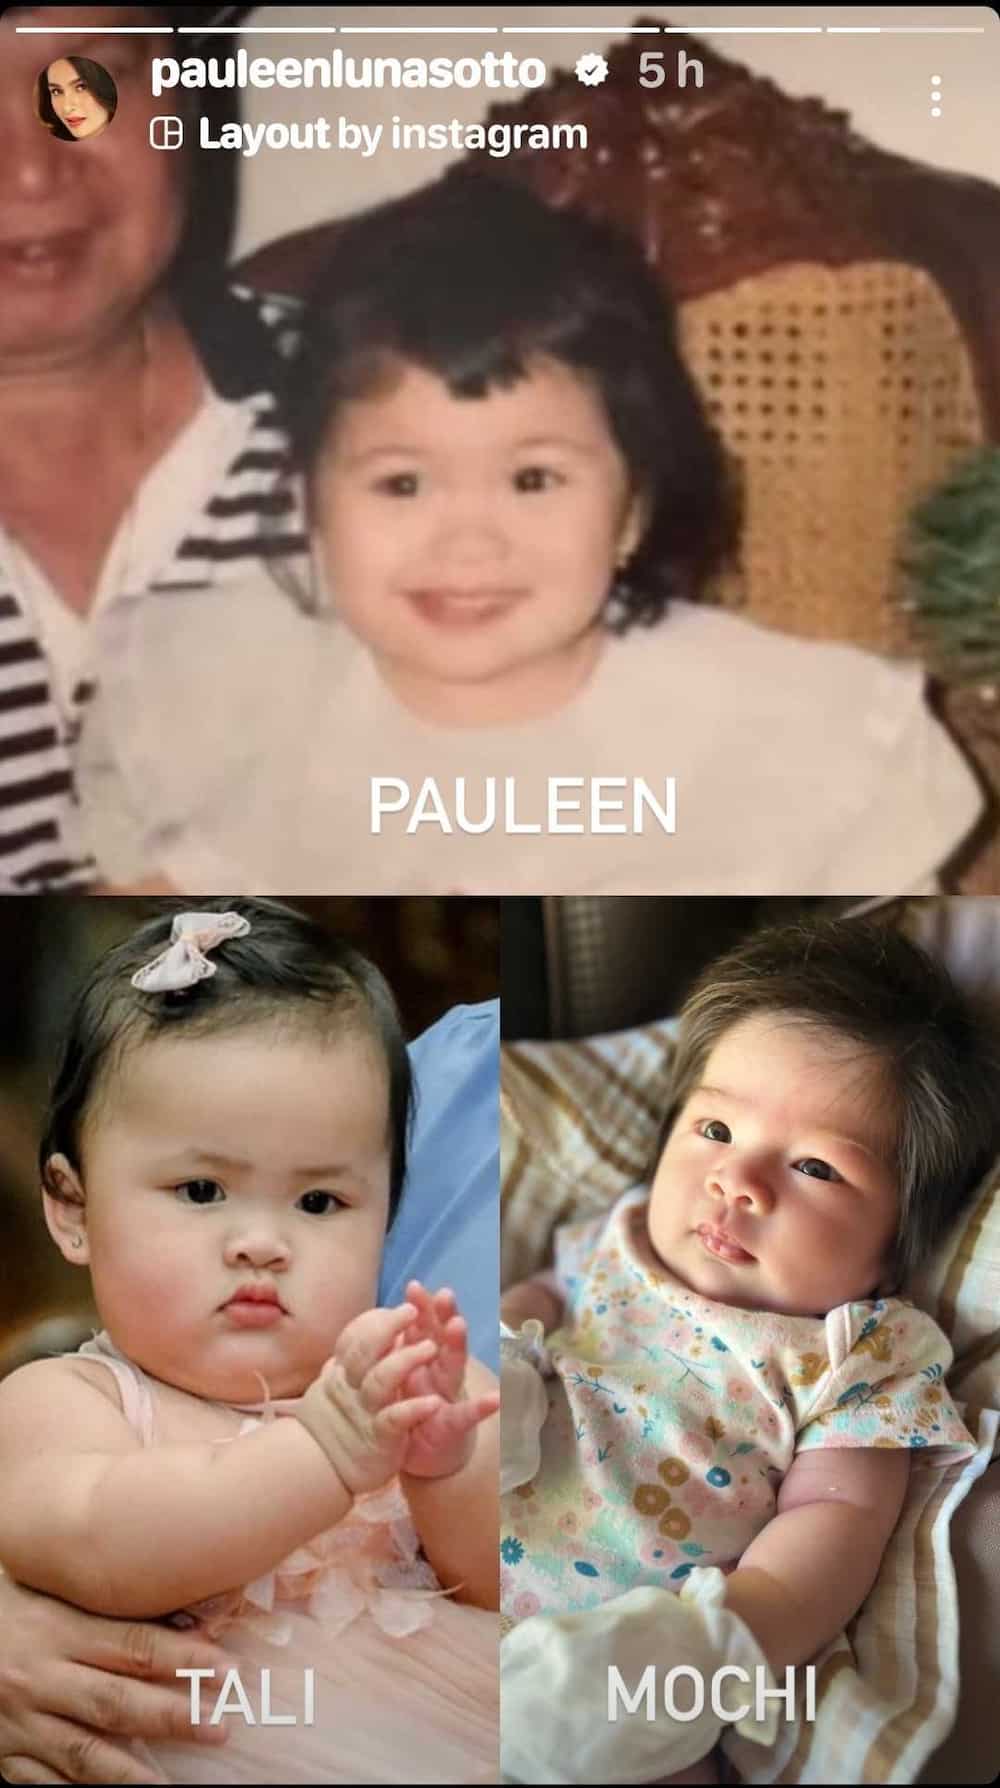 Pauleen Luna shares baby pics of her Tali Sotto and Baby Mochi